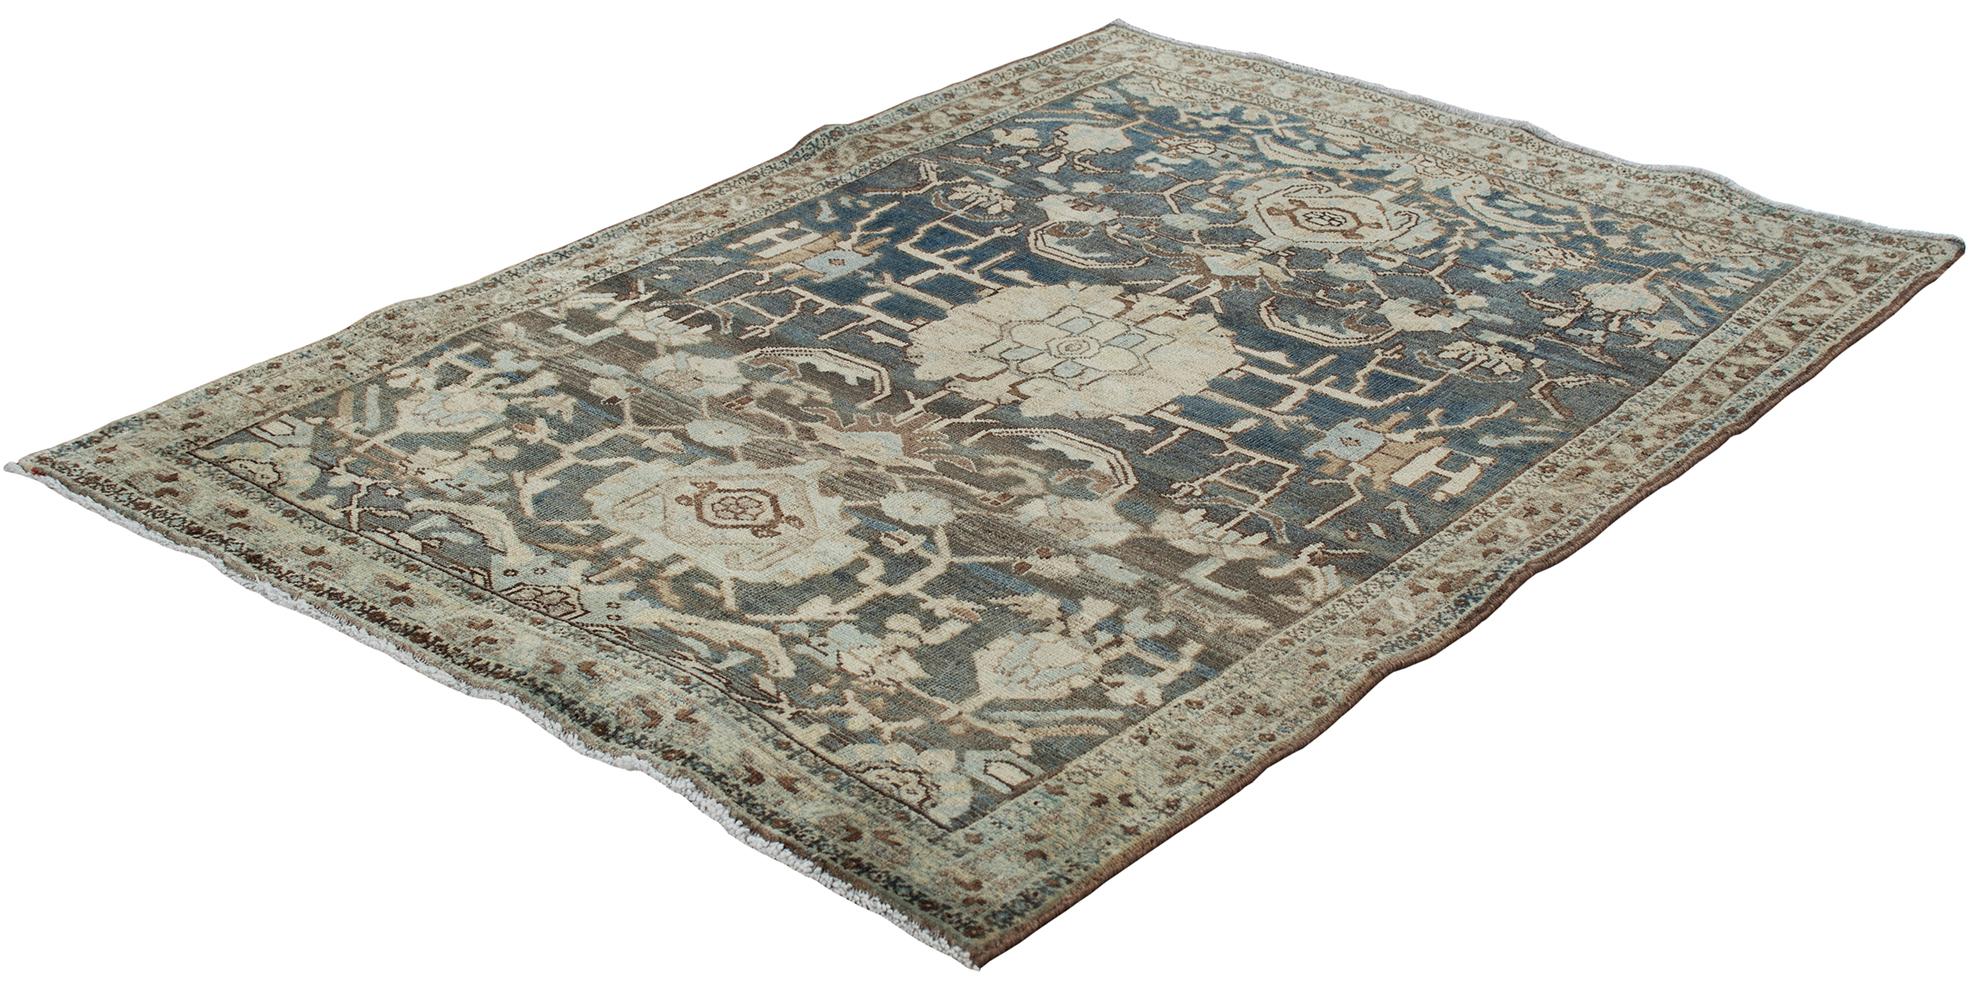 Early 20th Century Antique Persian Tabriz Wool Rug For Sale